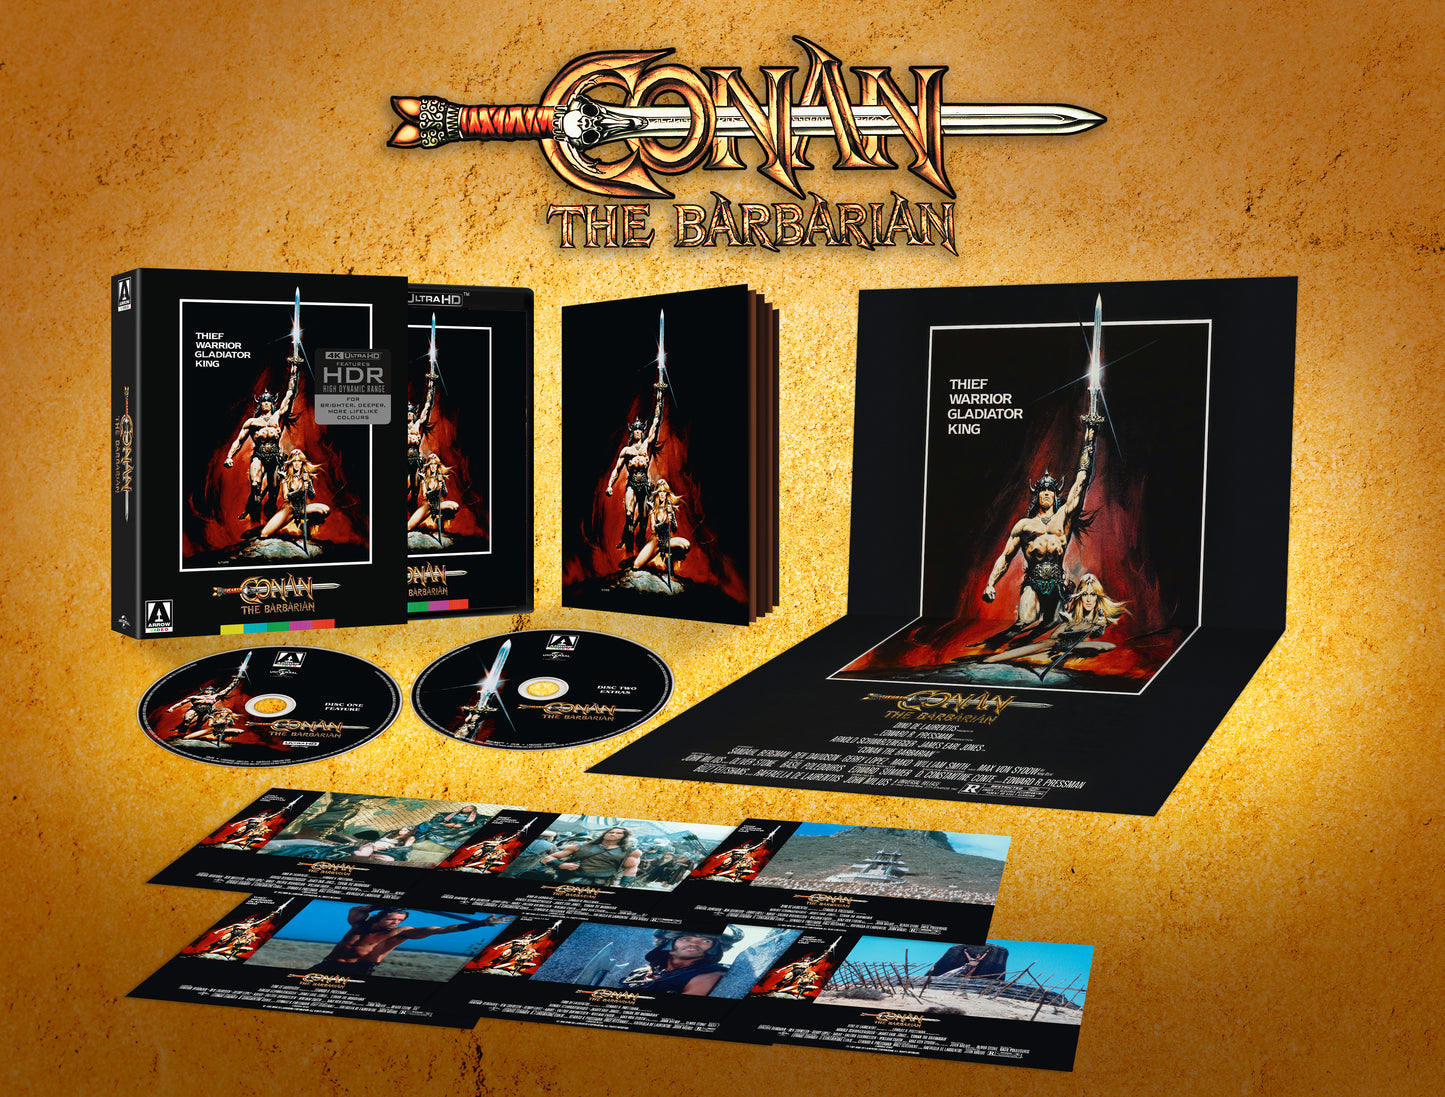 Conan the Barbarian 4K UHD Limited Edition with Slip (Arrow U.S.) [Preorder date change: see note]